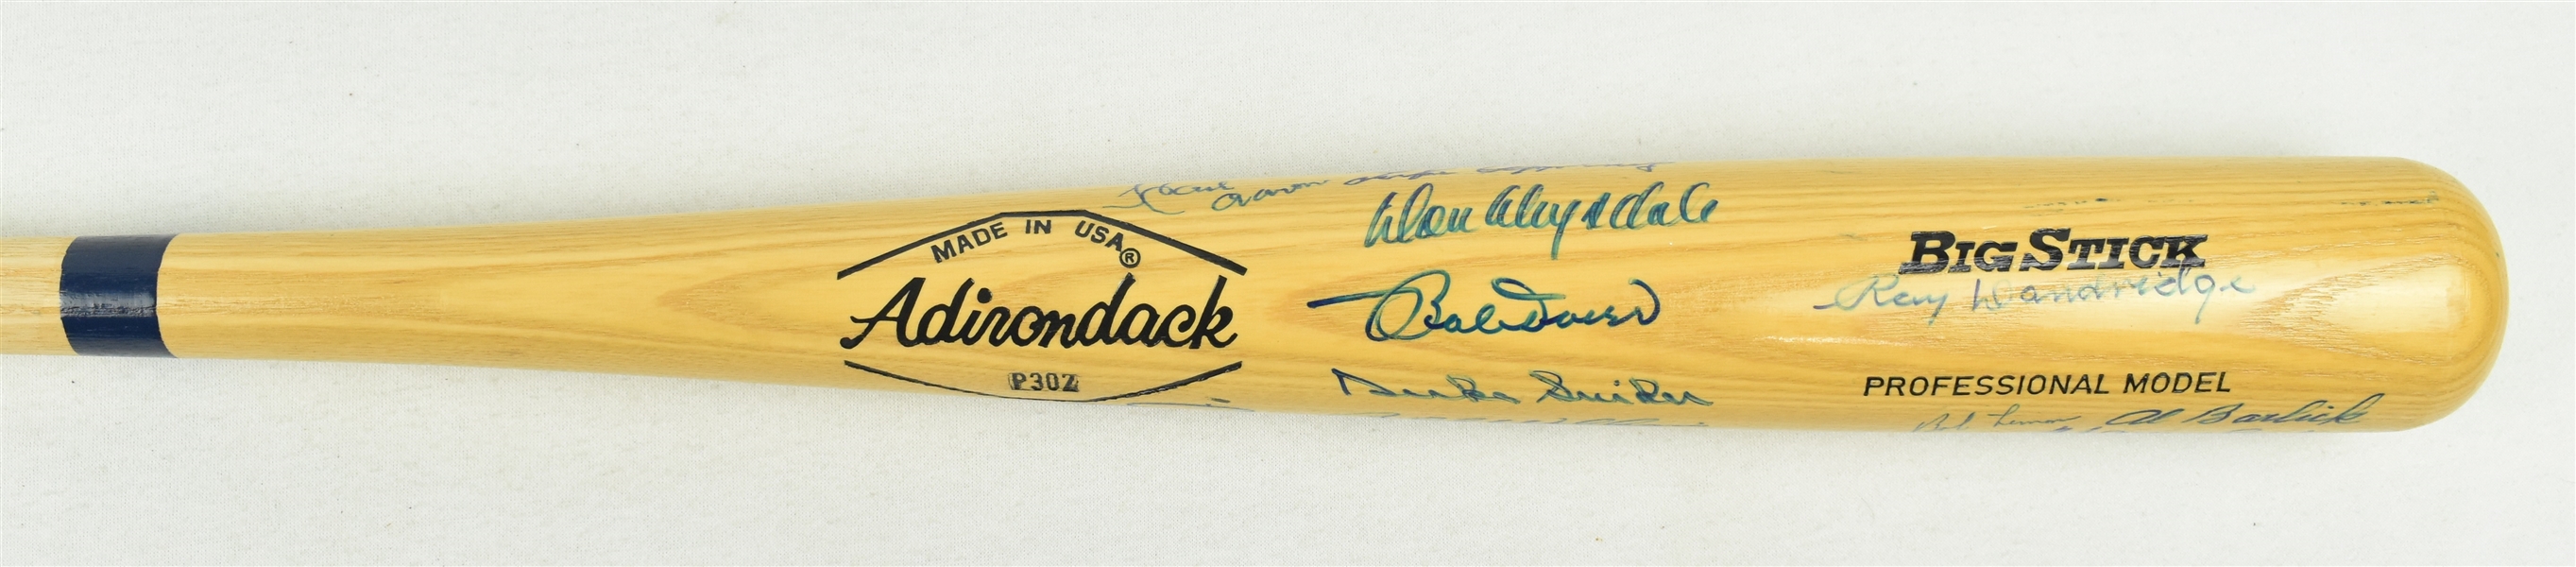 MLB Hall of Fame Autographed Bat w/23 Signatures 